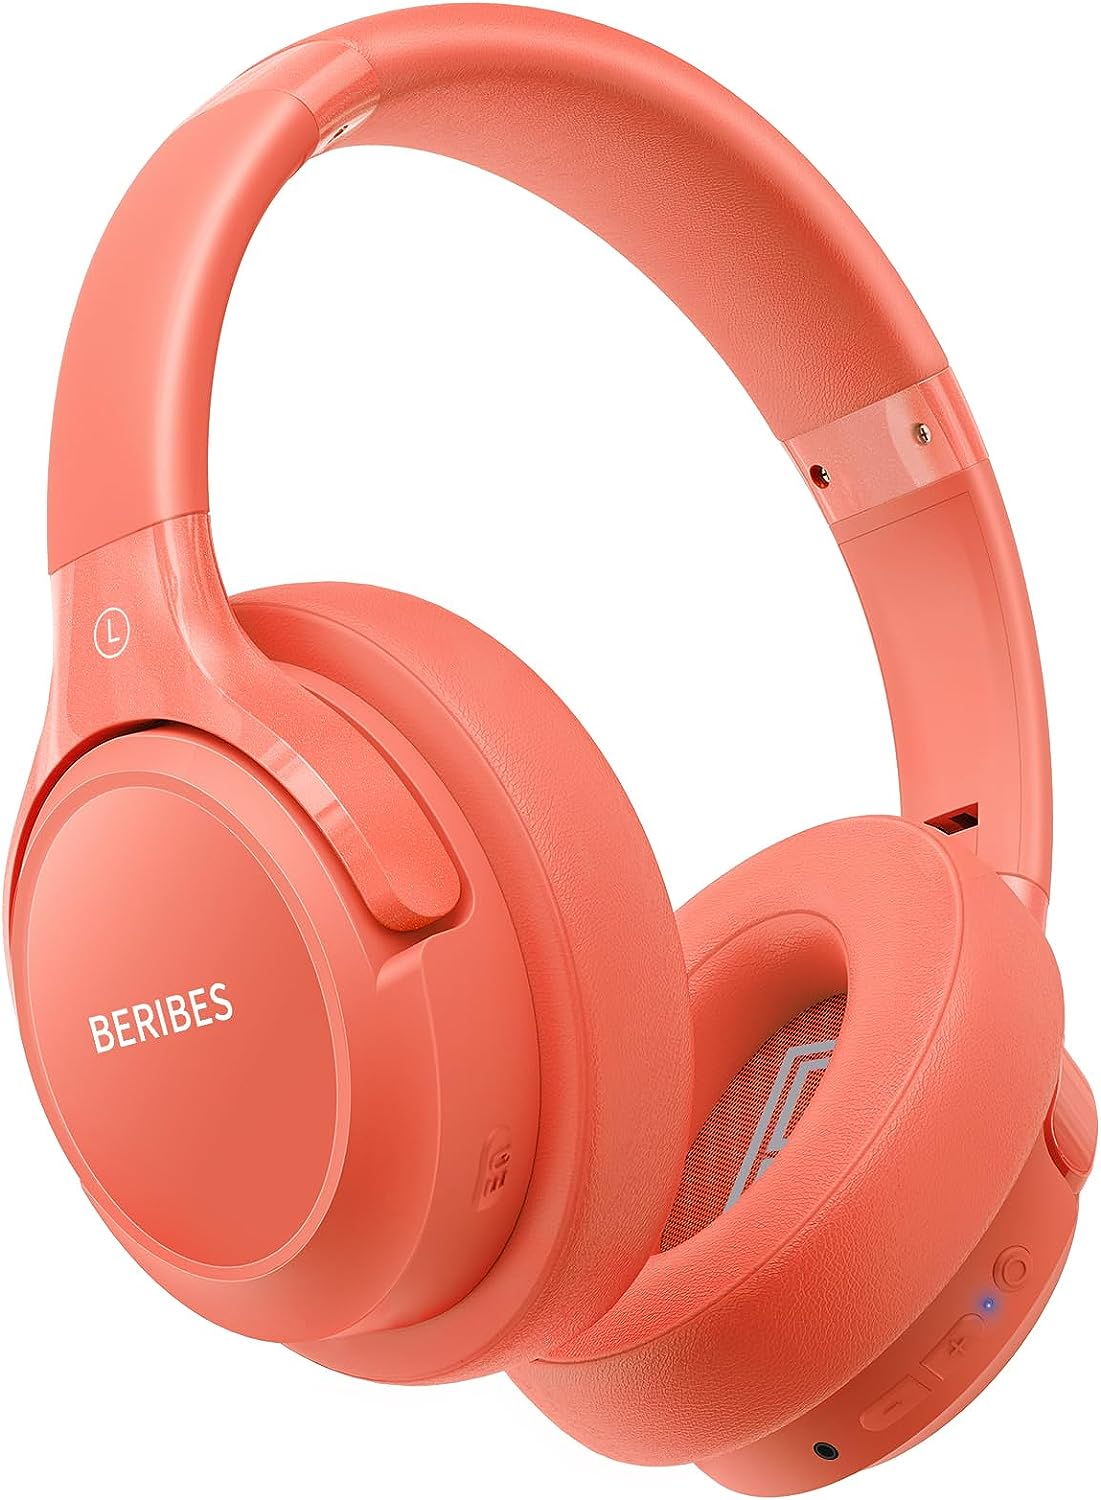 wireless headphones christmas gifts for older sister-ultimate buyer's guide